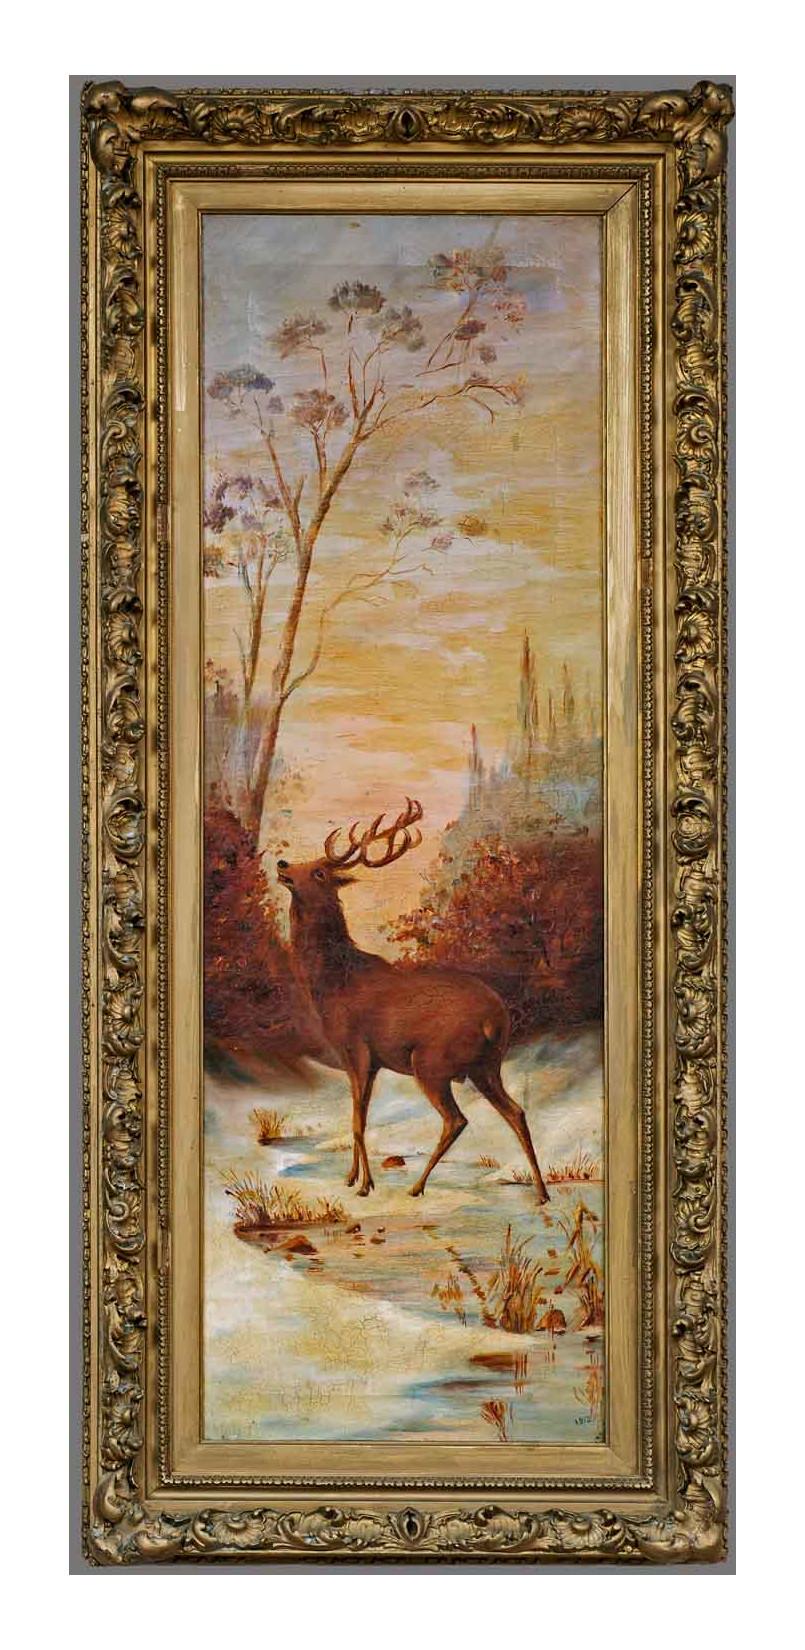 Two Stags in Winter Landscape, Twilight Oil on Canvas, Dated 1912 - Naturalistic Painting by Unknown